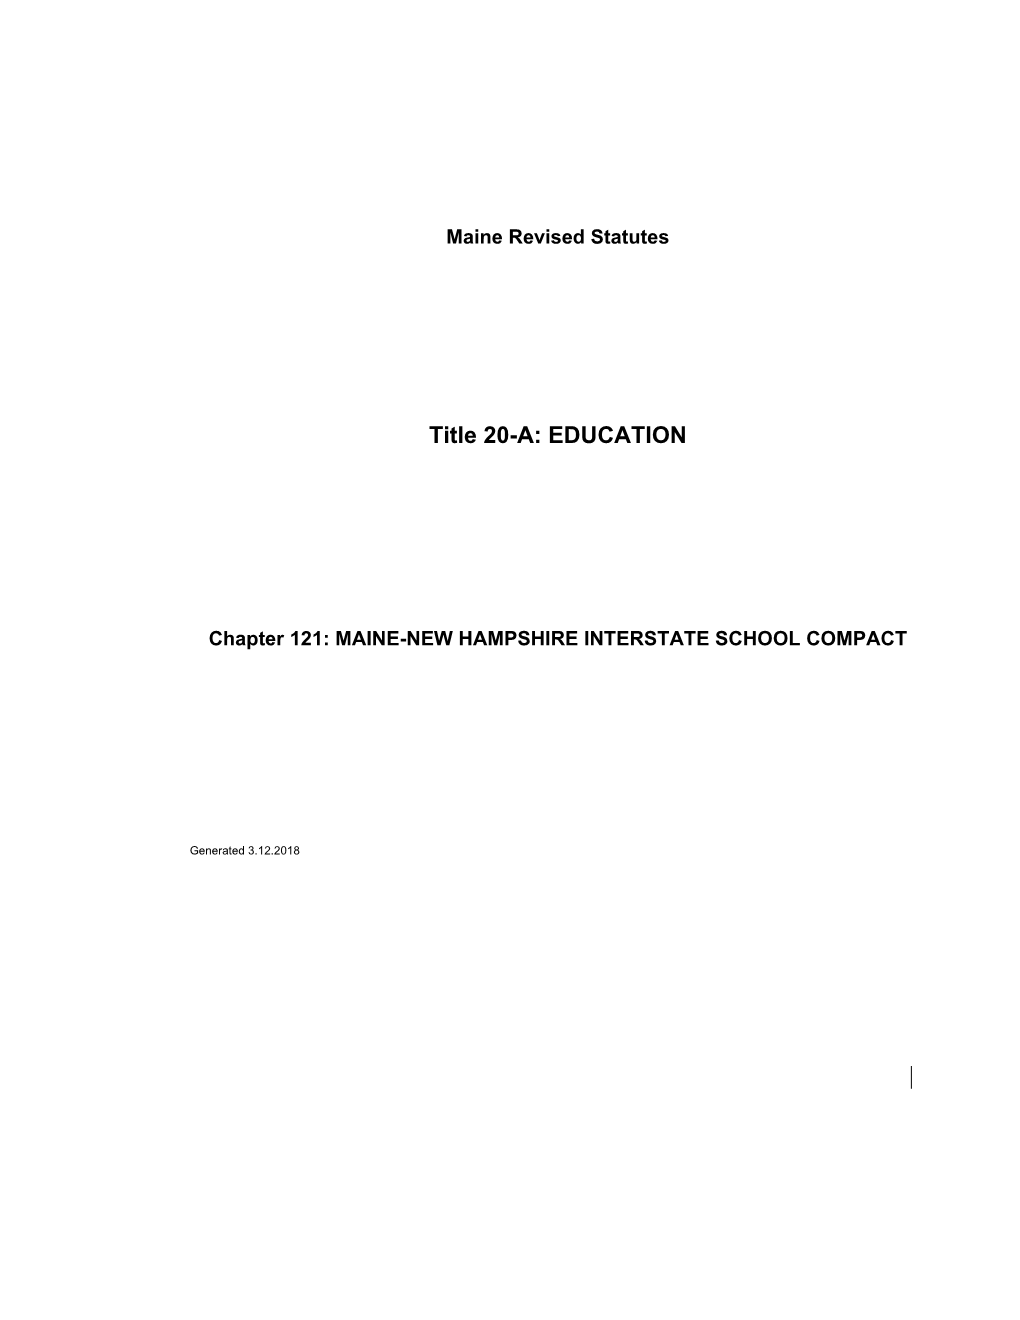 MRS Title 20-A 3659. CONTINUED EXISTENCE of MAINE SCHOOL DISTRICTS